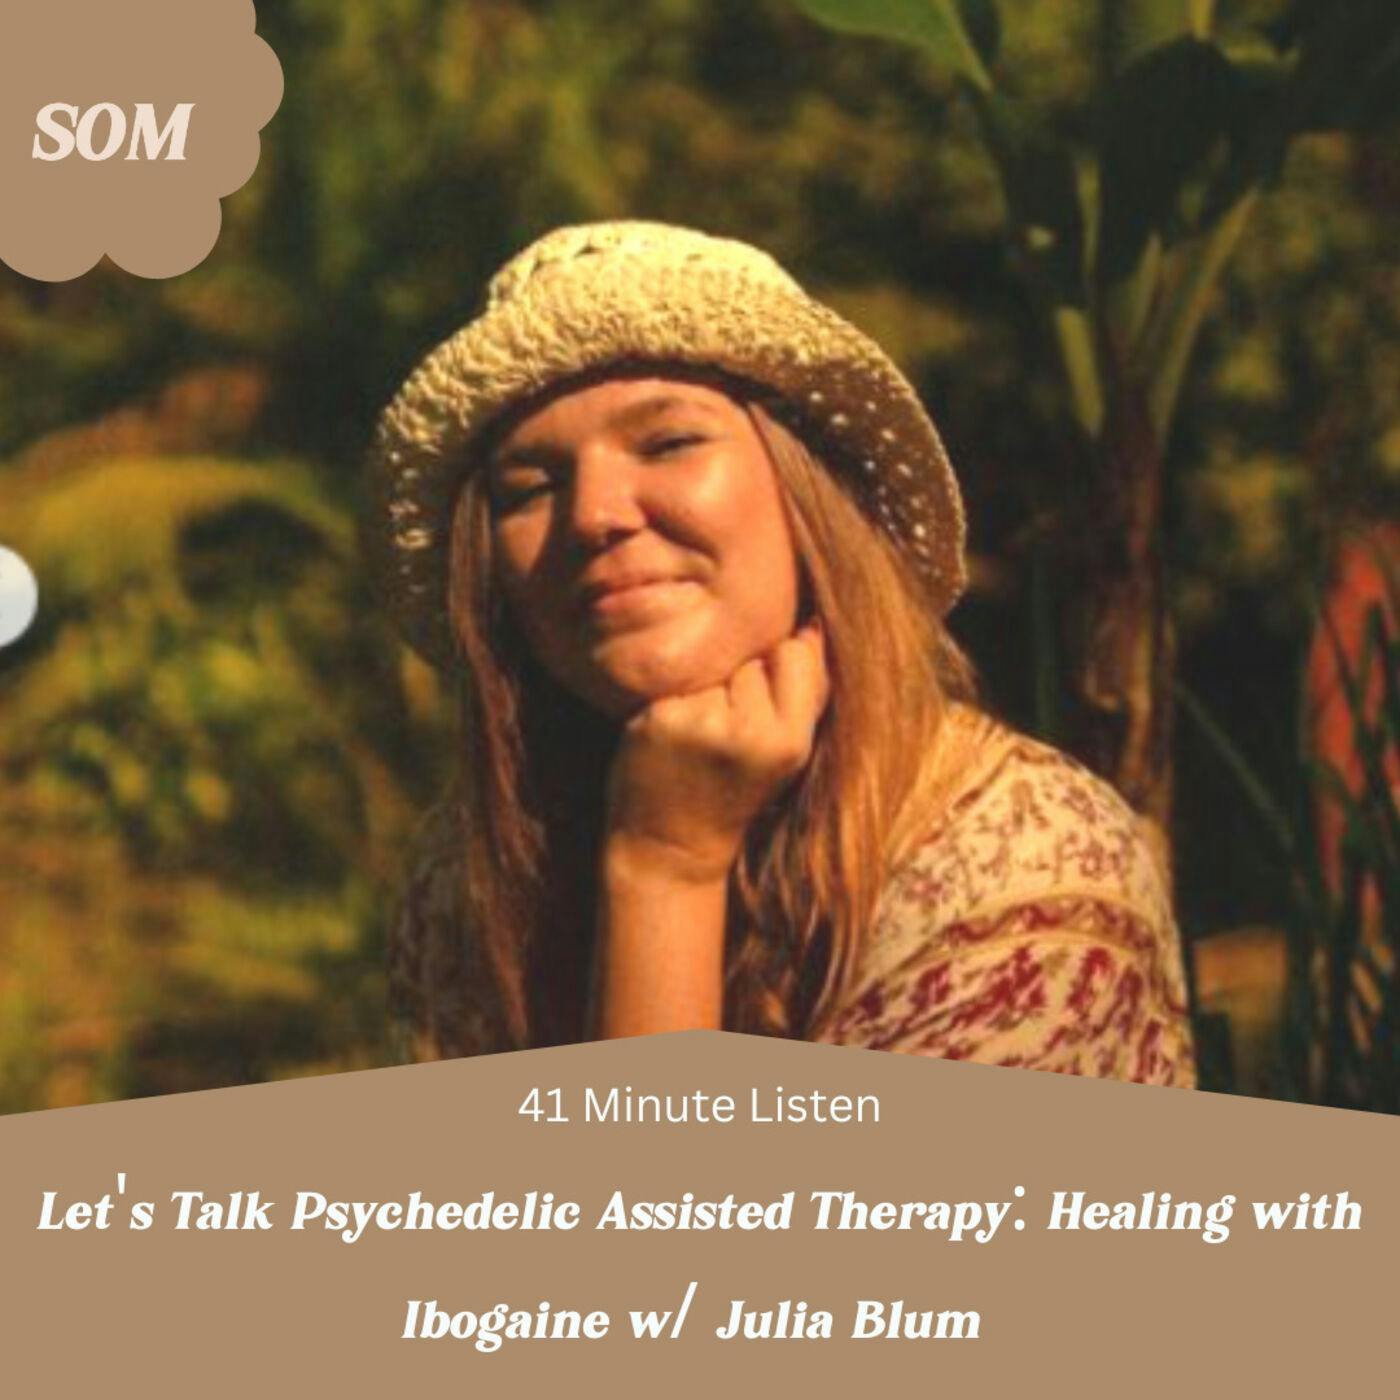 Let's Talk Psychedelic Assisted Therapy: Healing with Ibogaine w/ Julia Blum